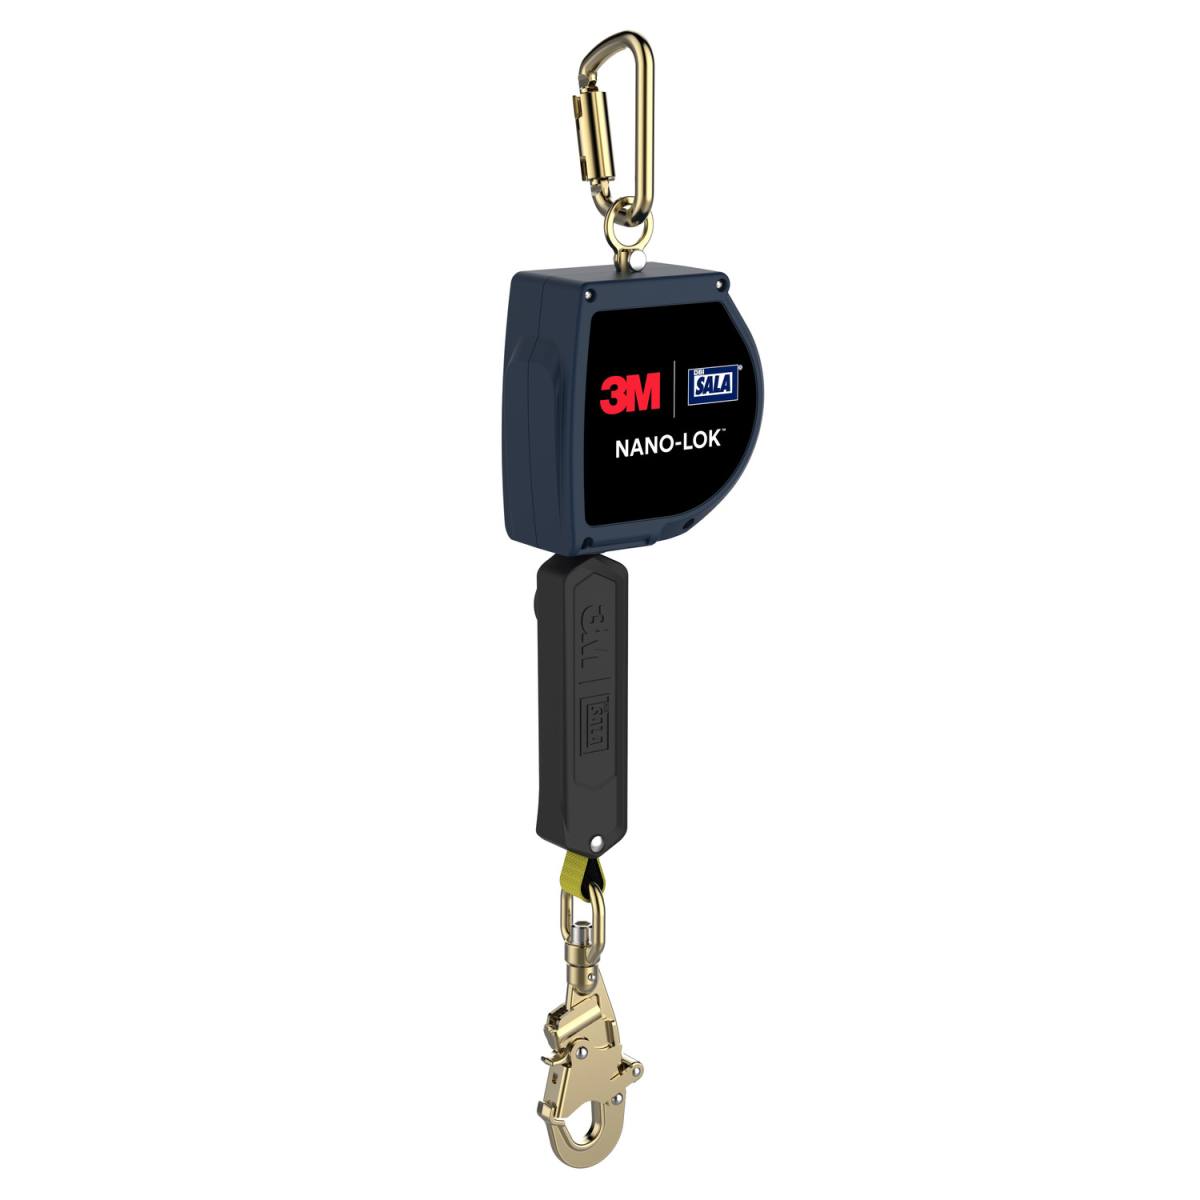 3M DBI-SALA Nano-Lok, webbing length: 6.0 m, 1 x steel twistlock carabiner opening width 18 mm on the housing, 1 x steel one-hand carabiner opening width 19 mm on the webbing, 140 kg user weight, 3M Connected Safety-ready RFID tag for inspection, 6.0